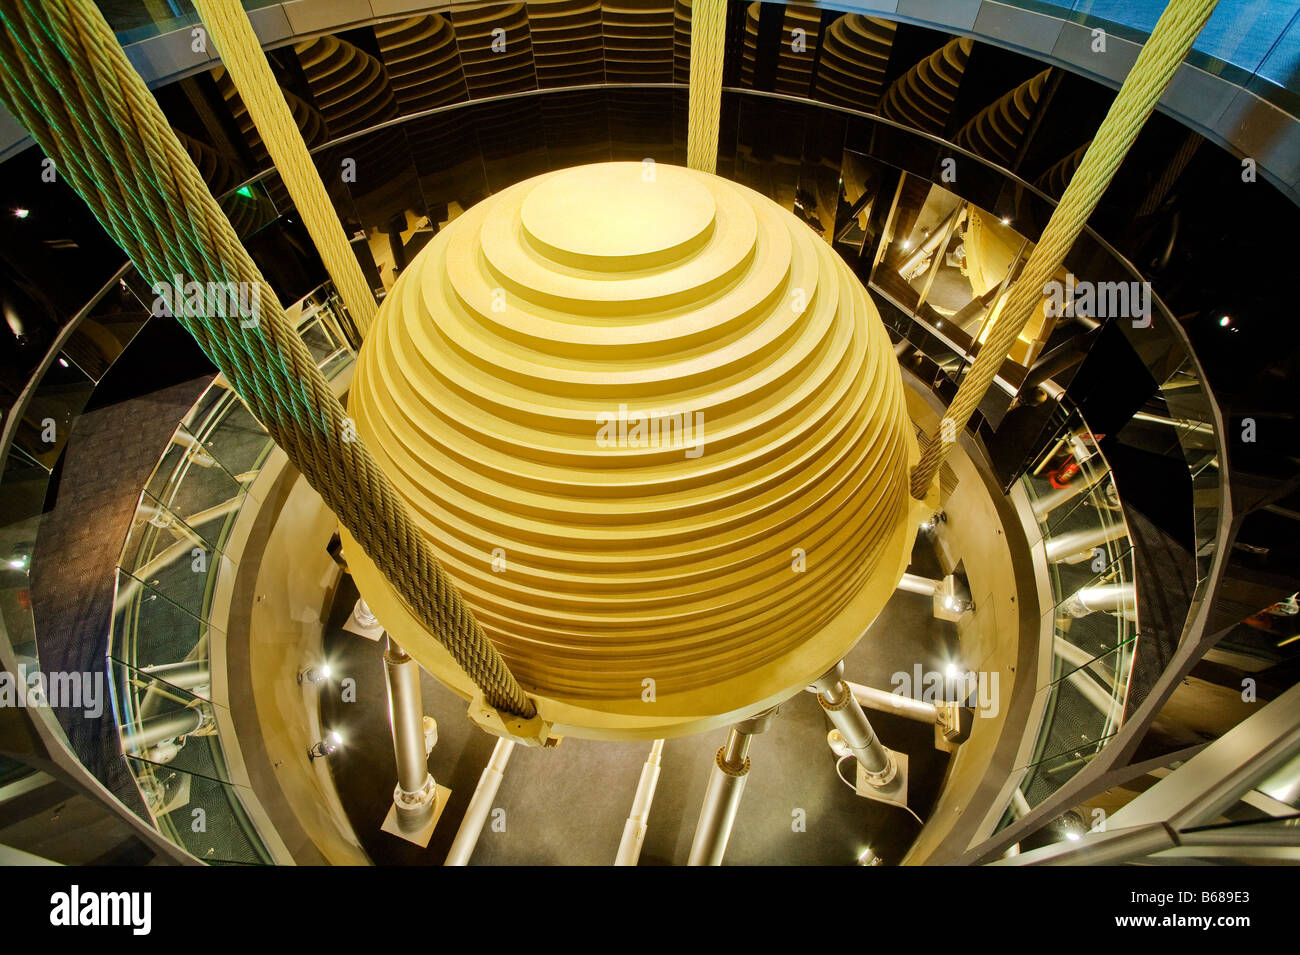 Taipei, Taiwan - The Massive Wind Damper Inside Of Taipei 101, One Of The  Tallest Buildings In The World Stock Photo - Alamy